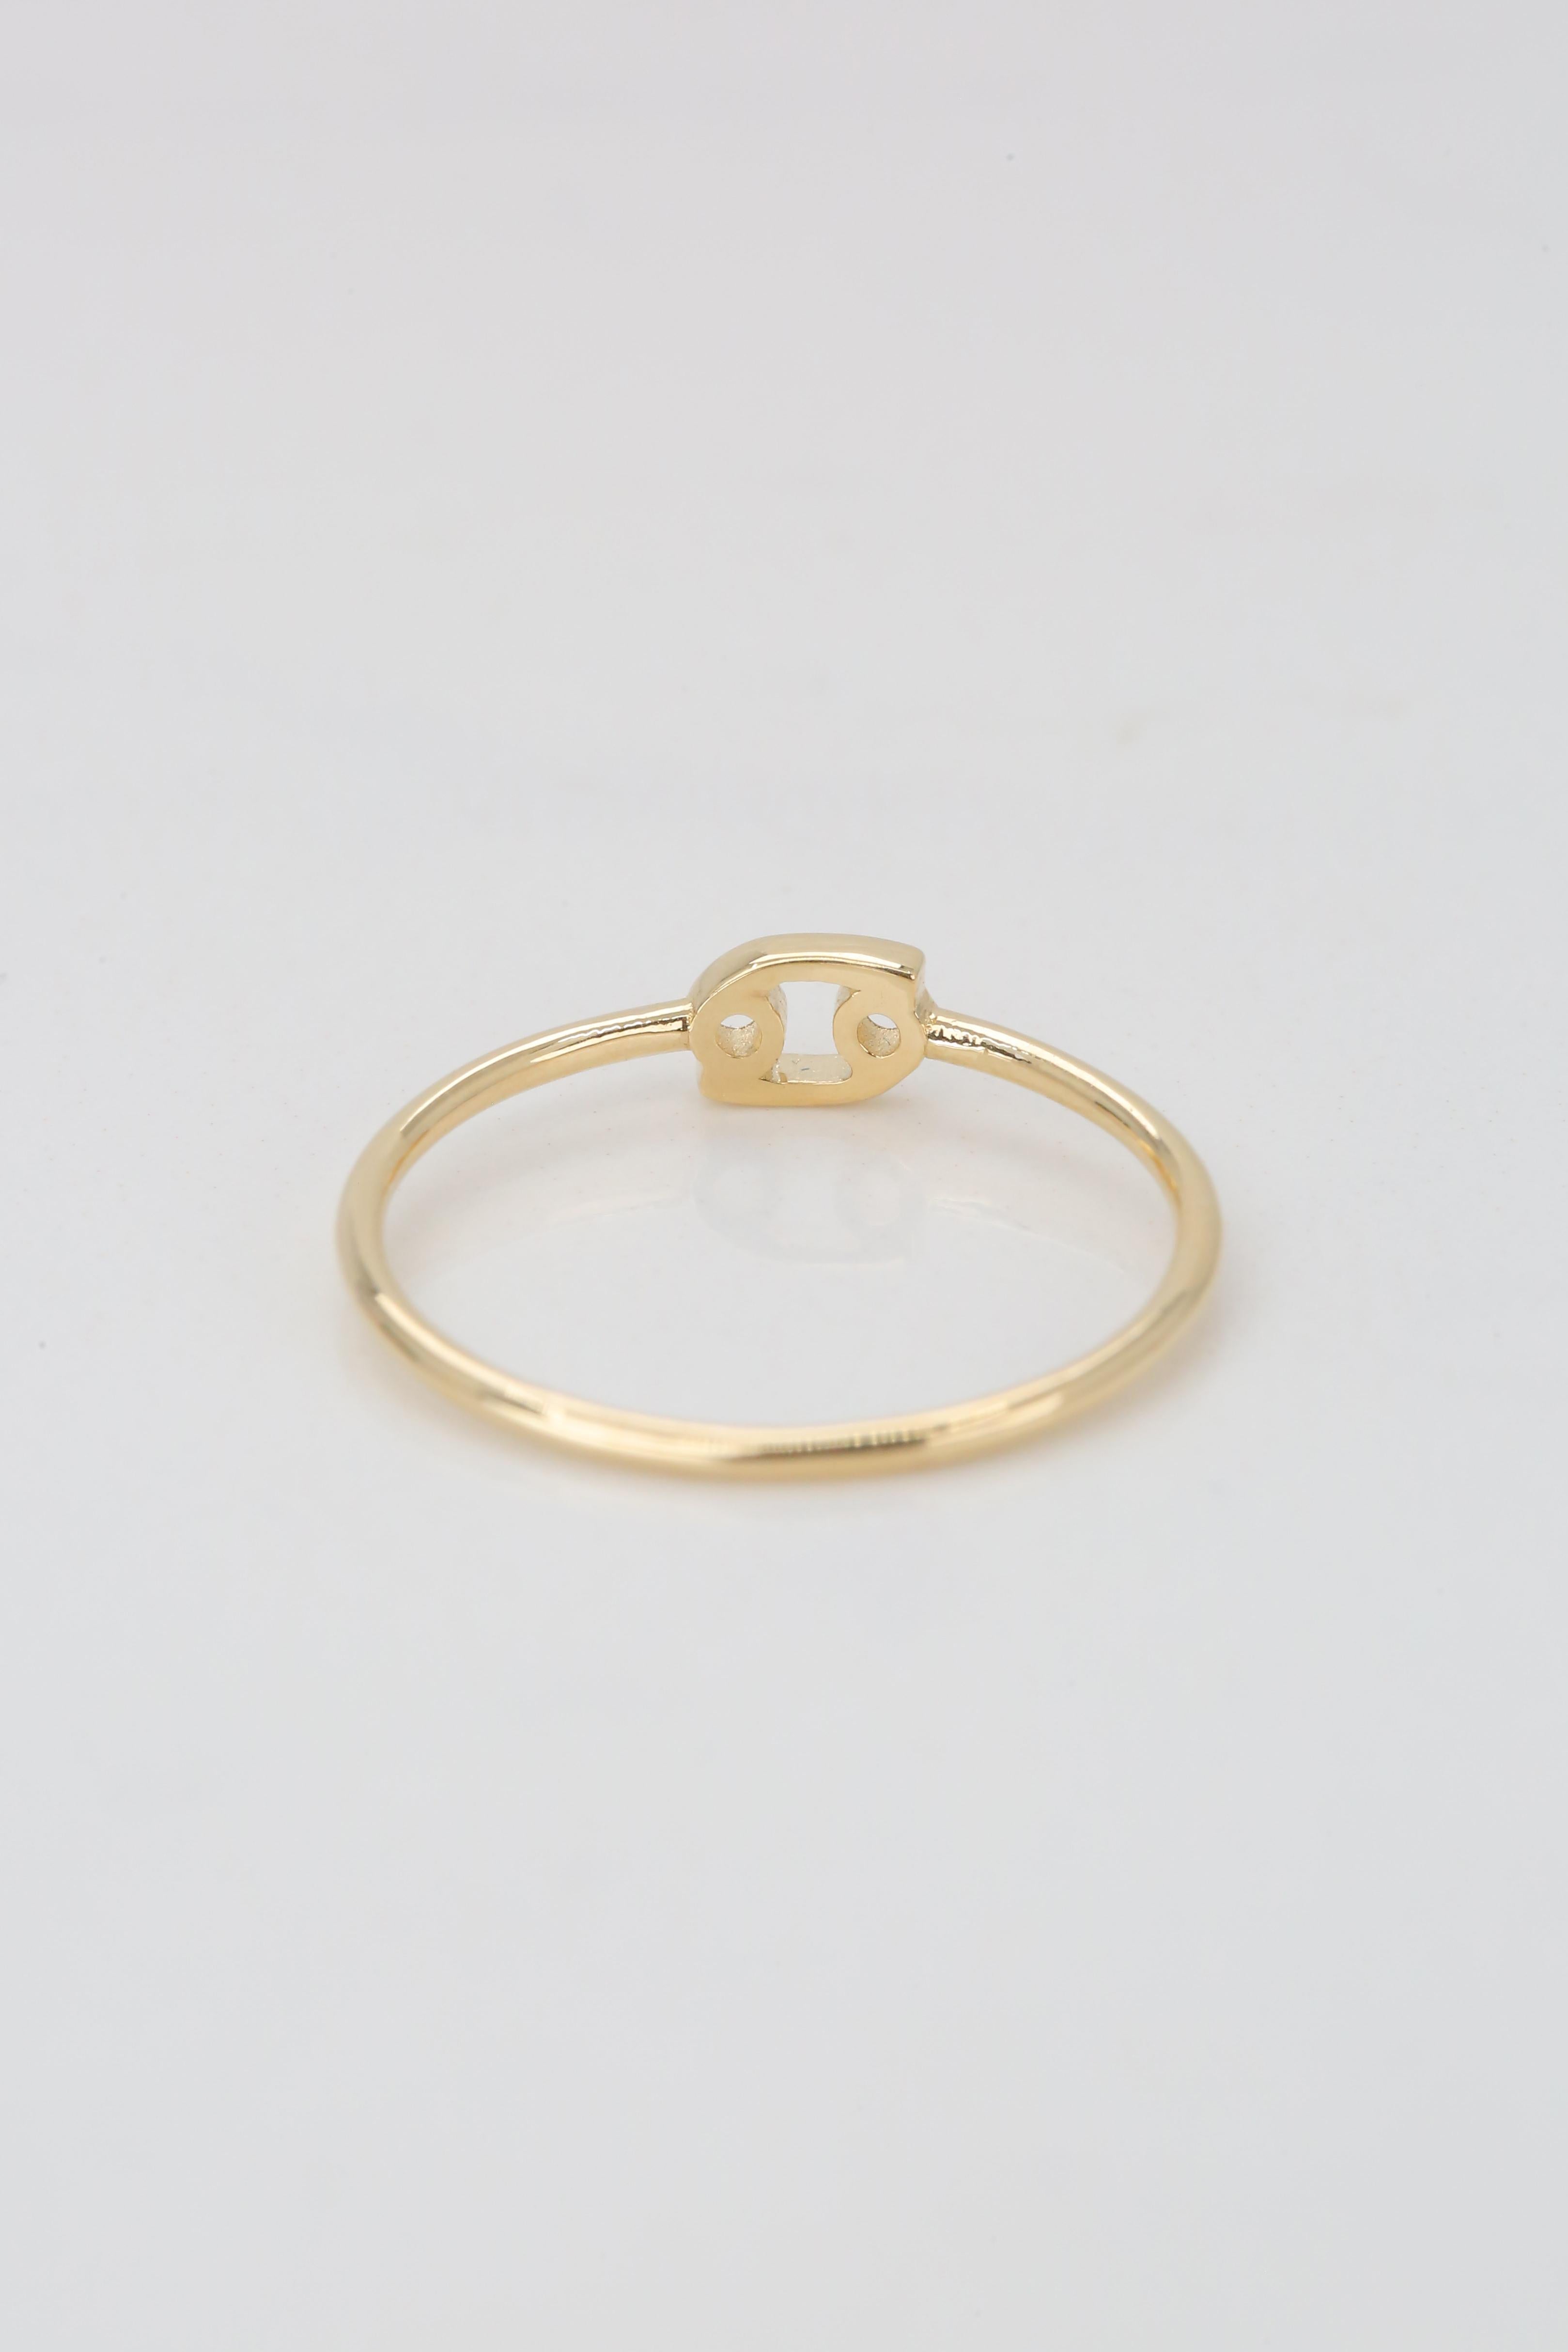 For Sale:  14K Gold Cancer Zodiac Ring, Cancer Sign Zodiac Ring 7